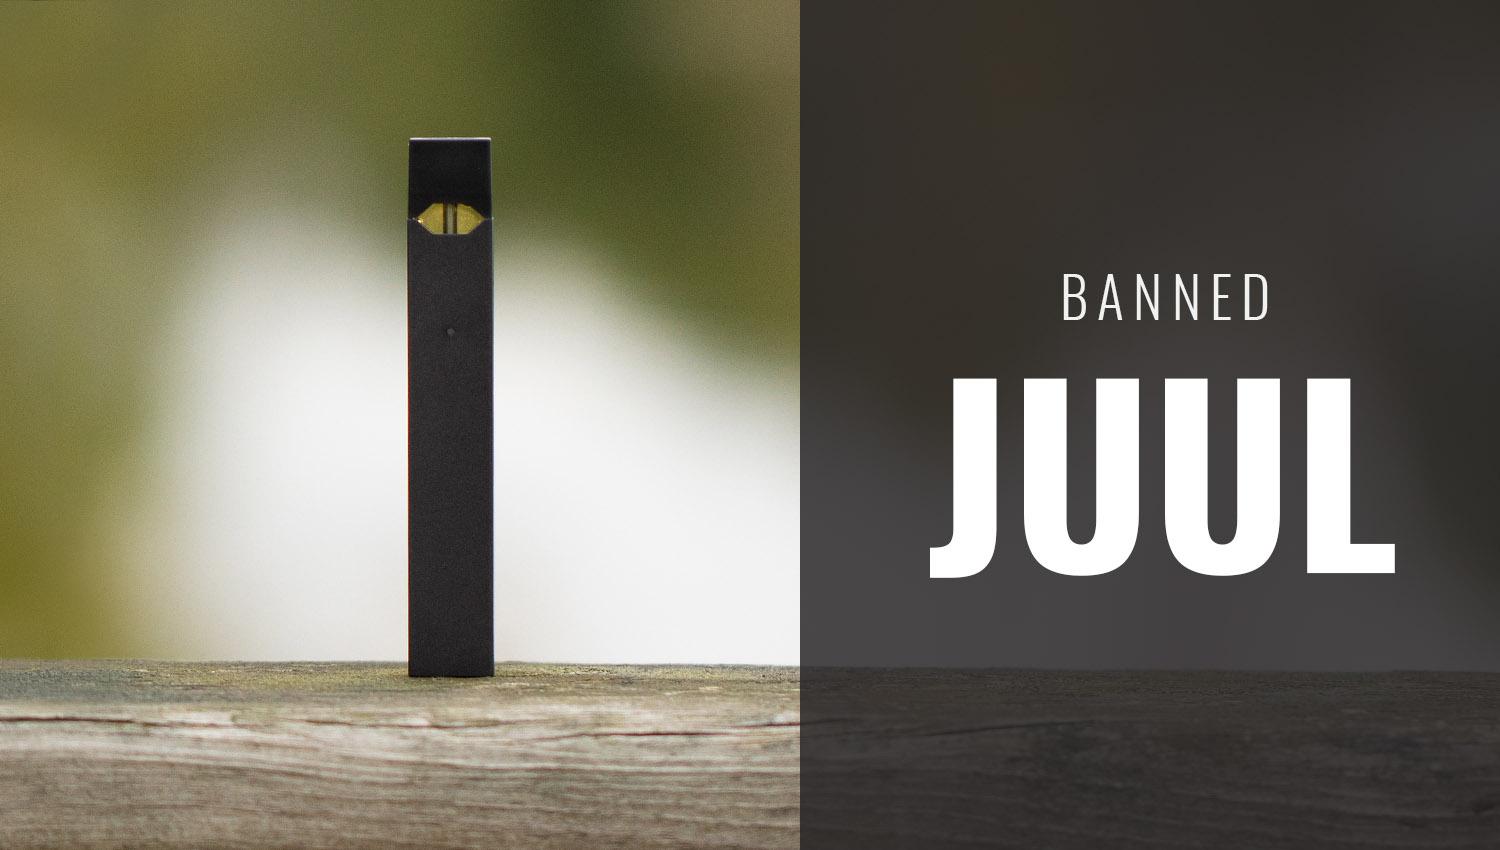 juul banned